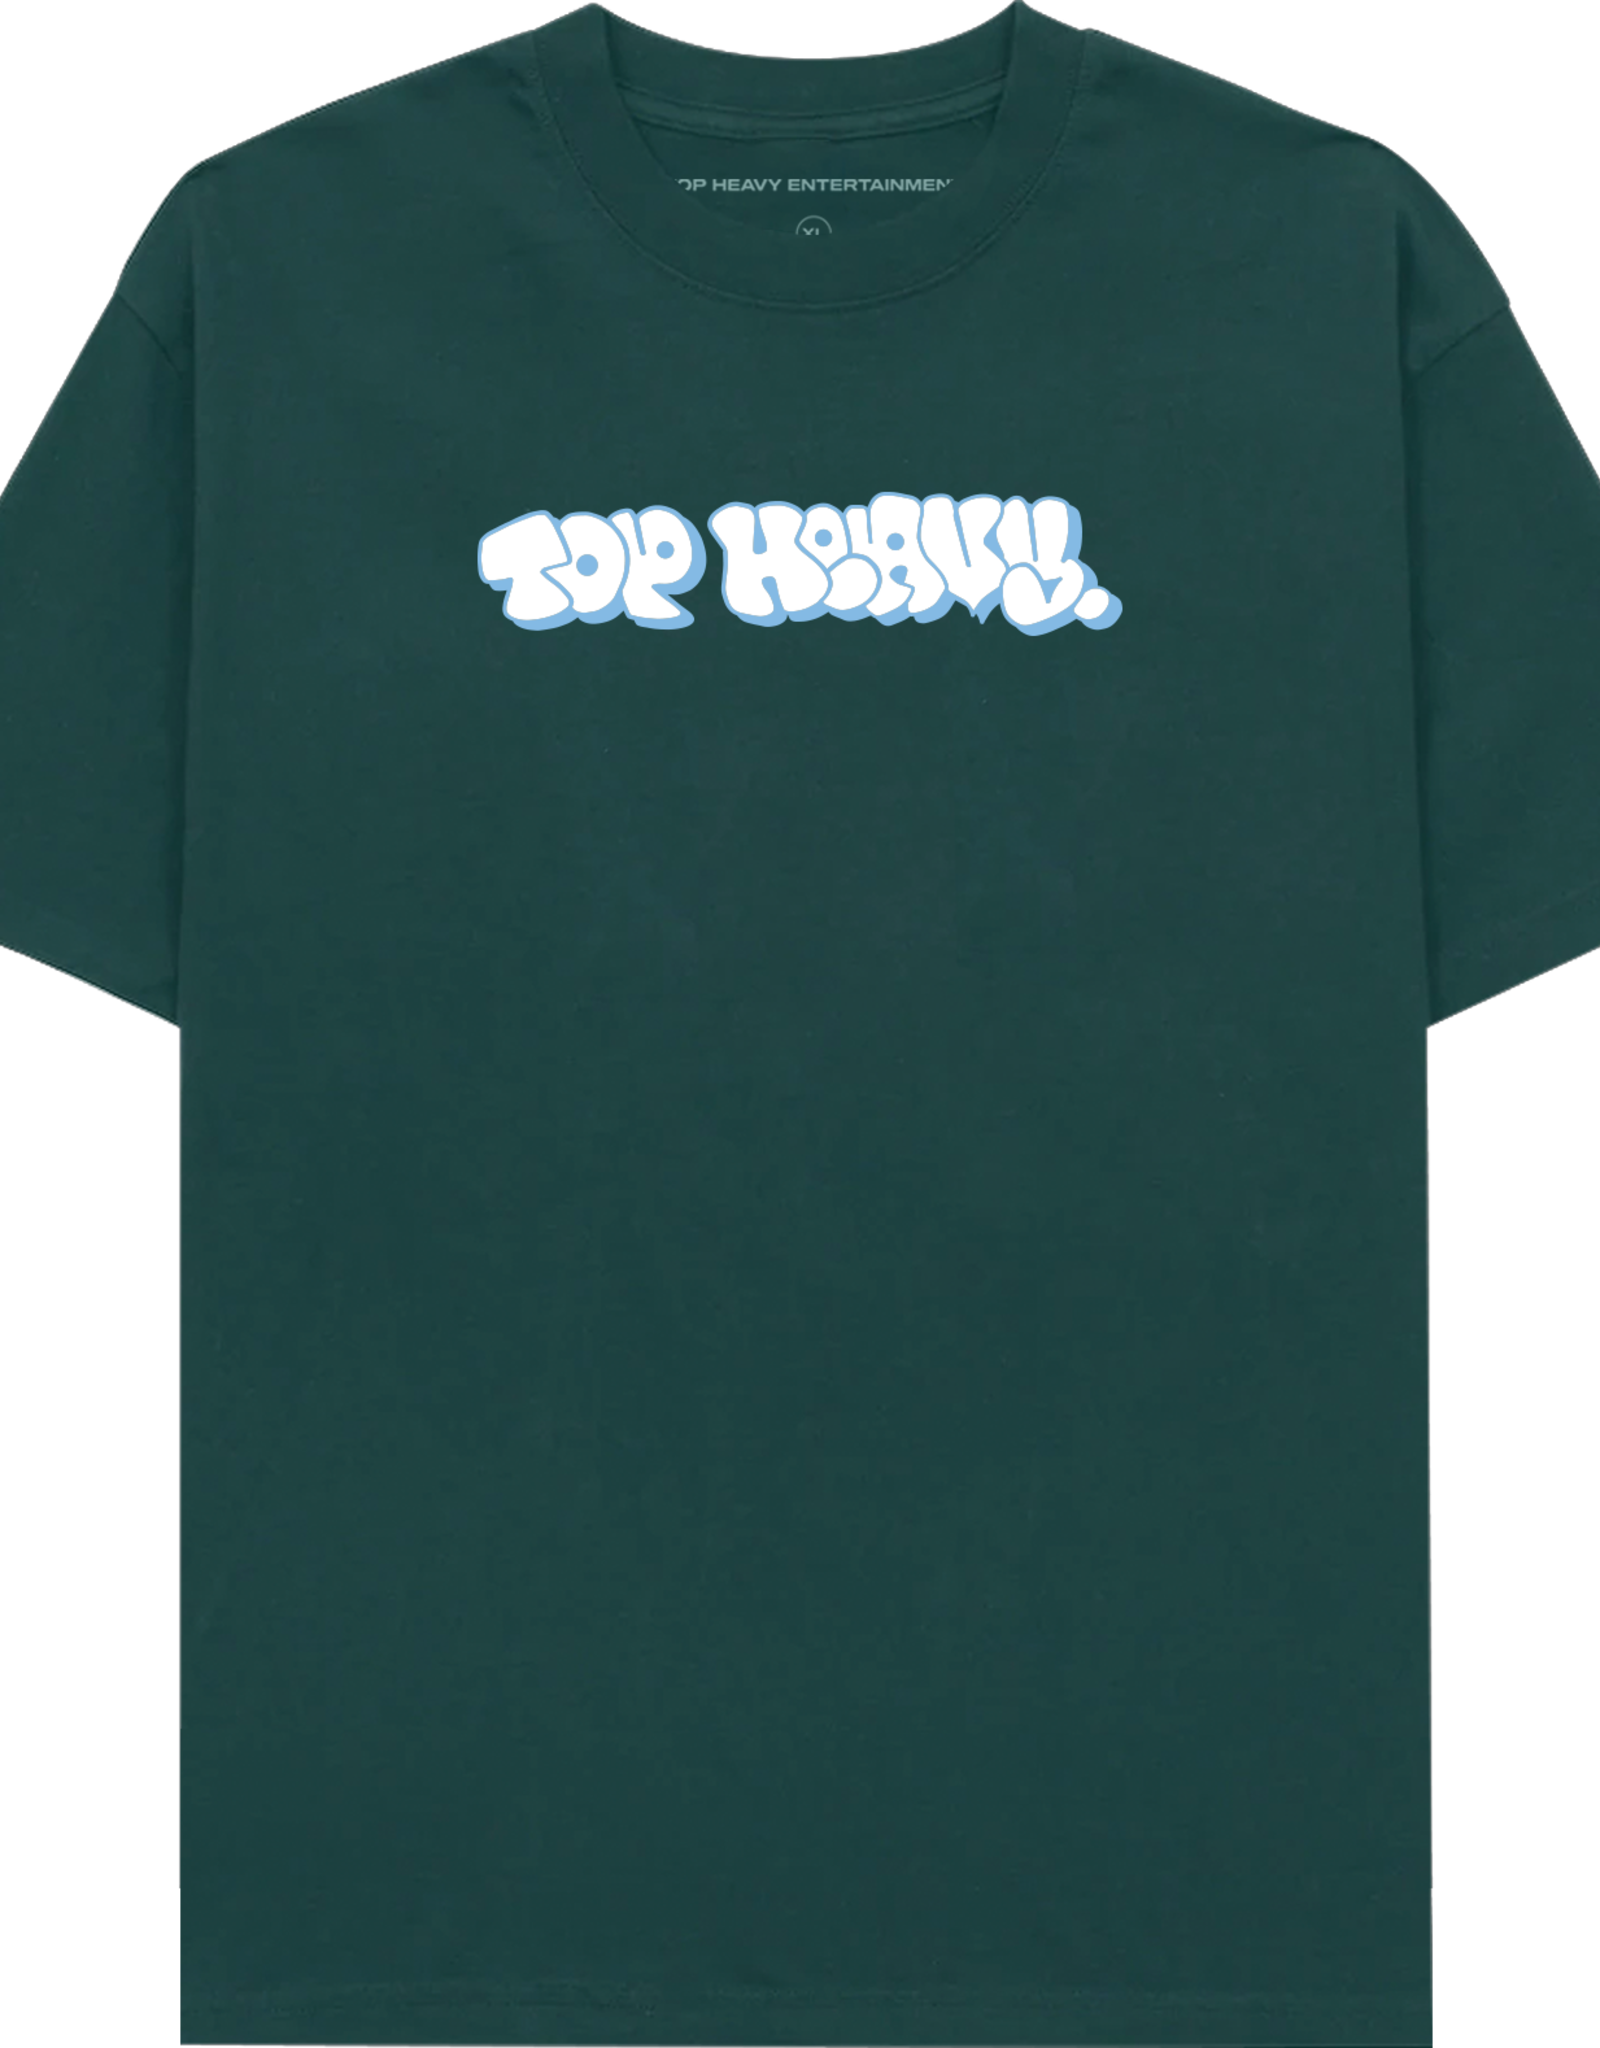 TOP HEAVY ENTERTAINMENT TOP HEAVY OG THROWIE TEE - FOREST / BABY BLUE